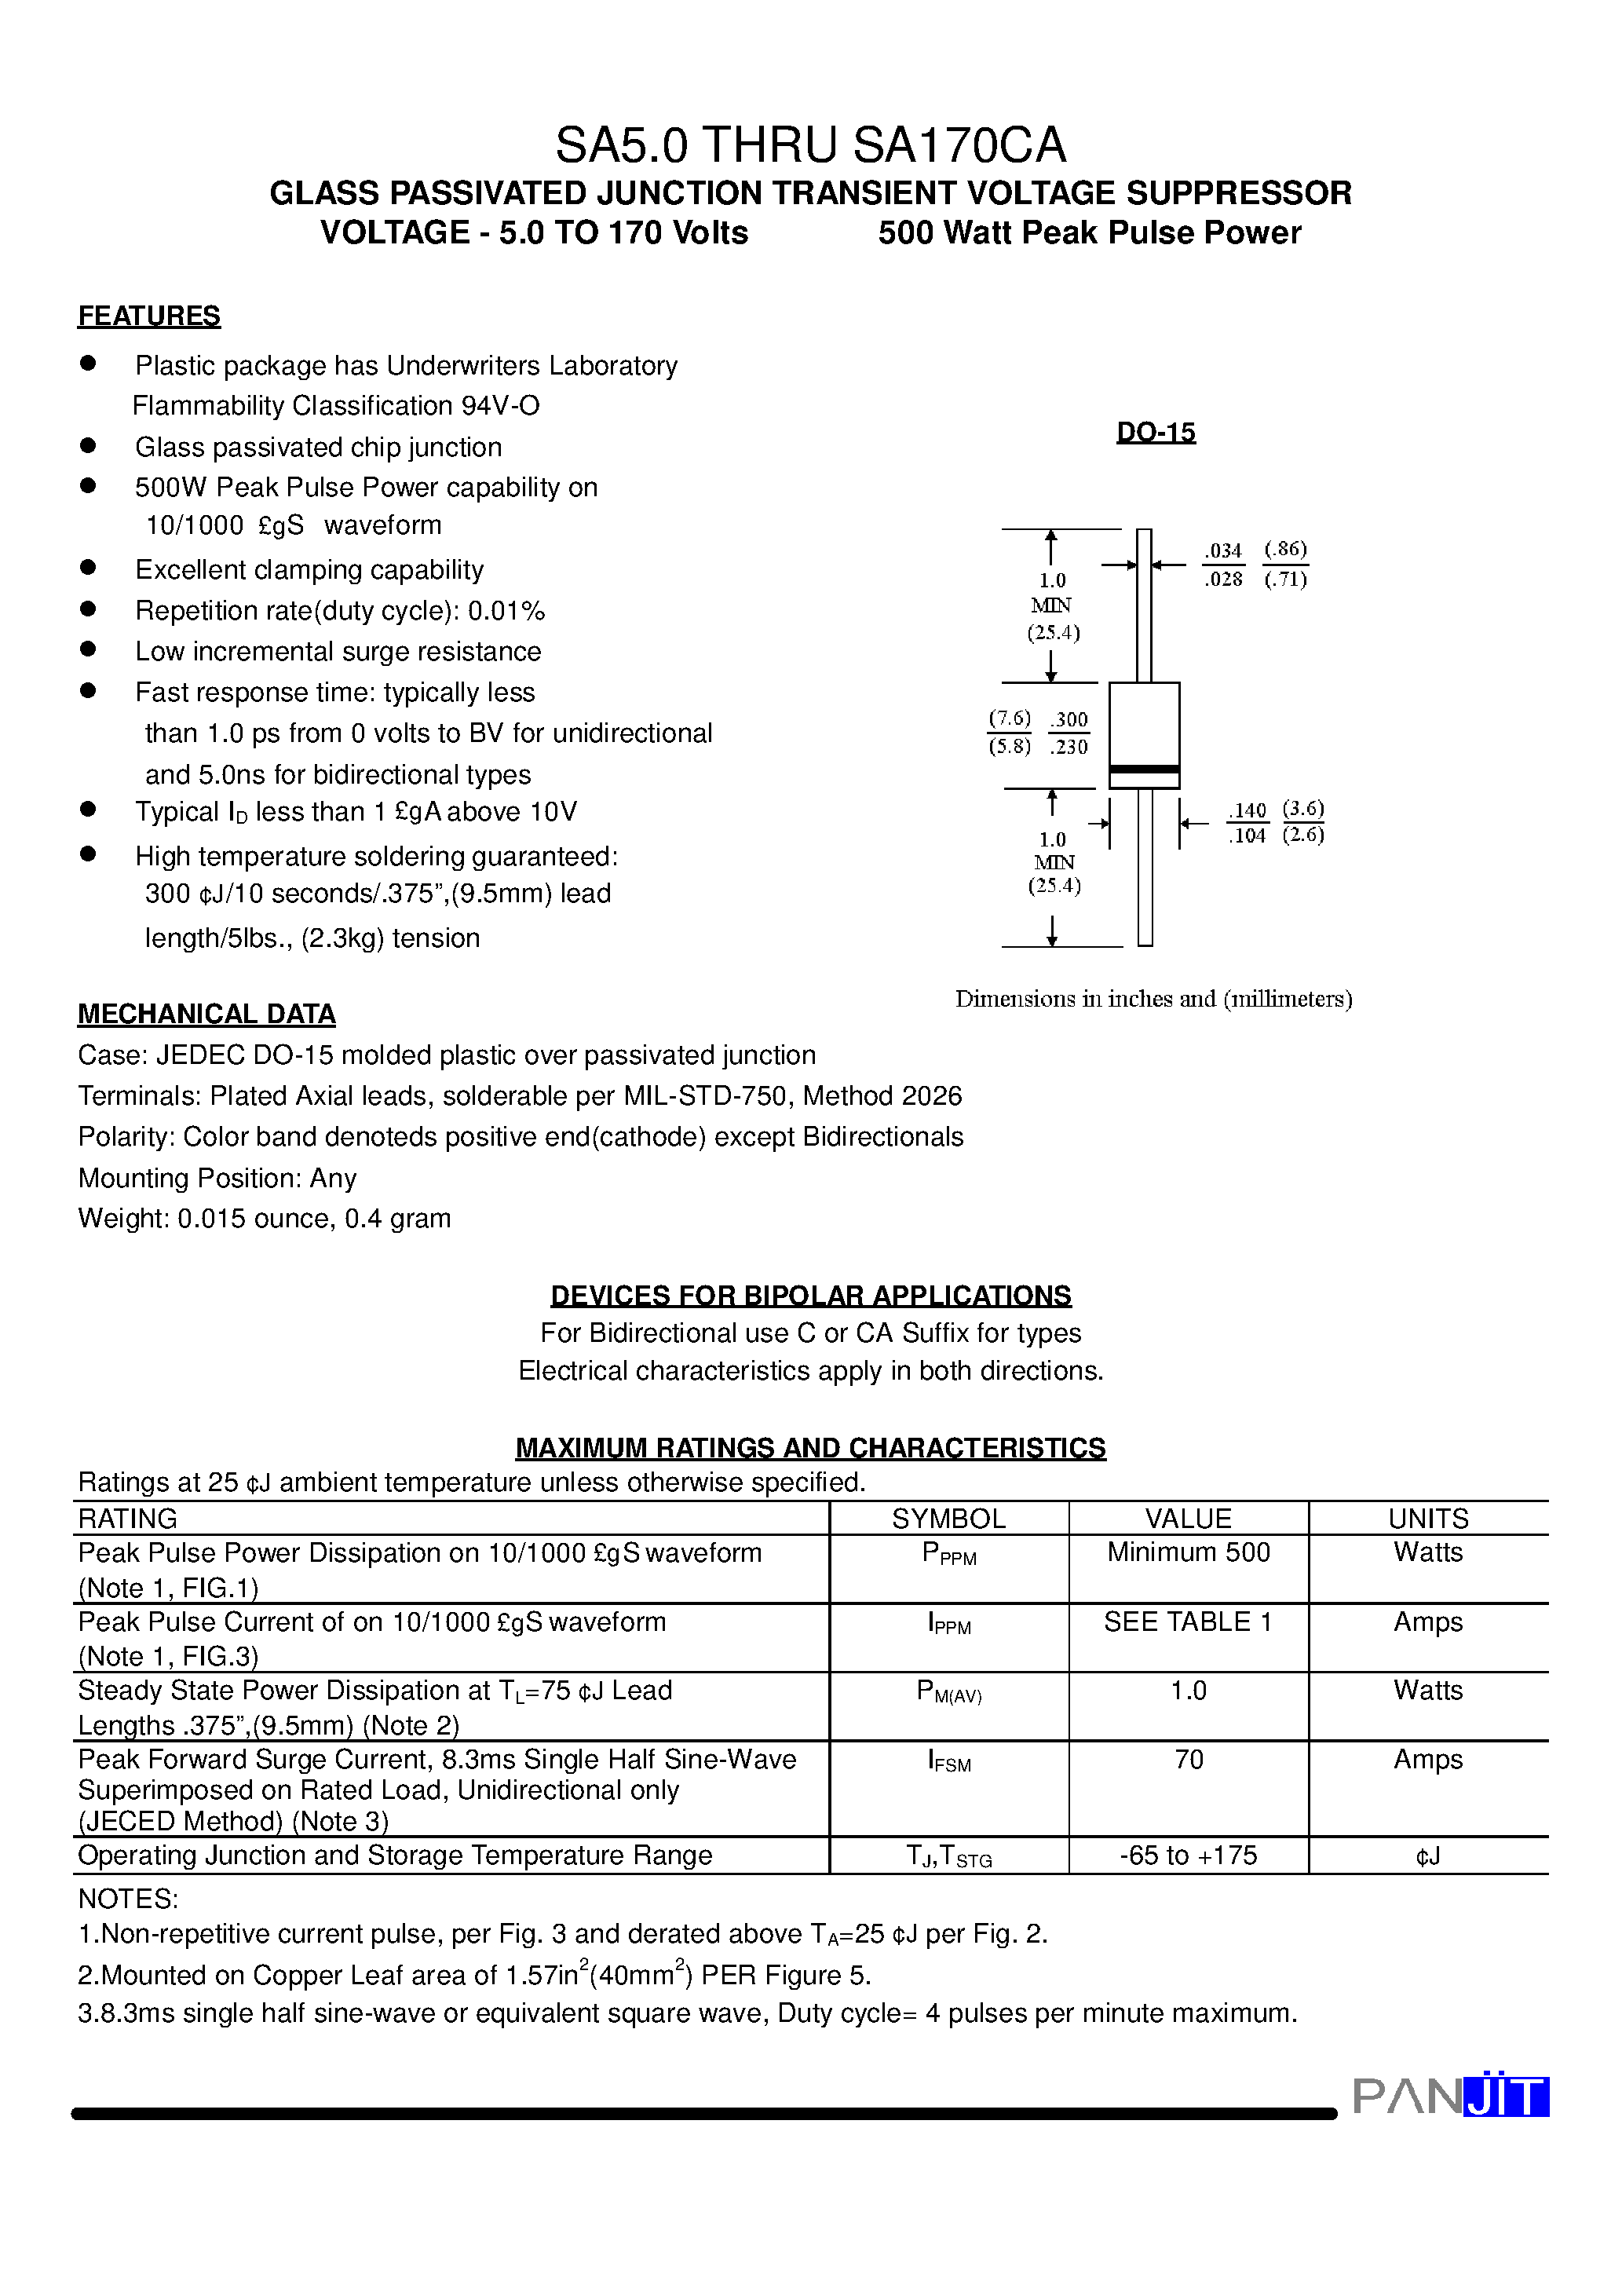 Datasheet SA30A - GLASS PASSIVATED JUNCTION TRANSIENT VOLTAGE SUPPRESSOR(VOLTAGE - 5.0 TO 170 Volts 500 Watt Peak Pulse Power) page 1